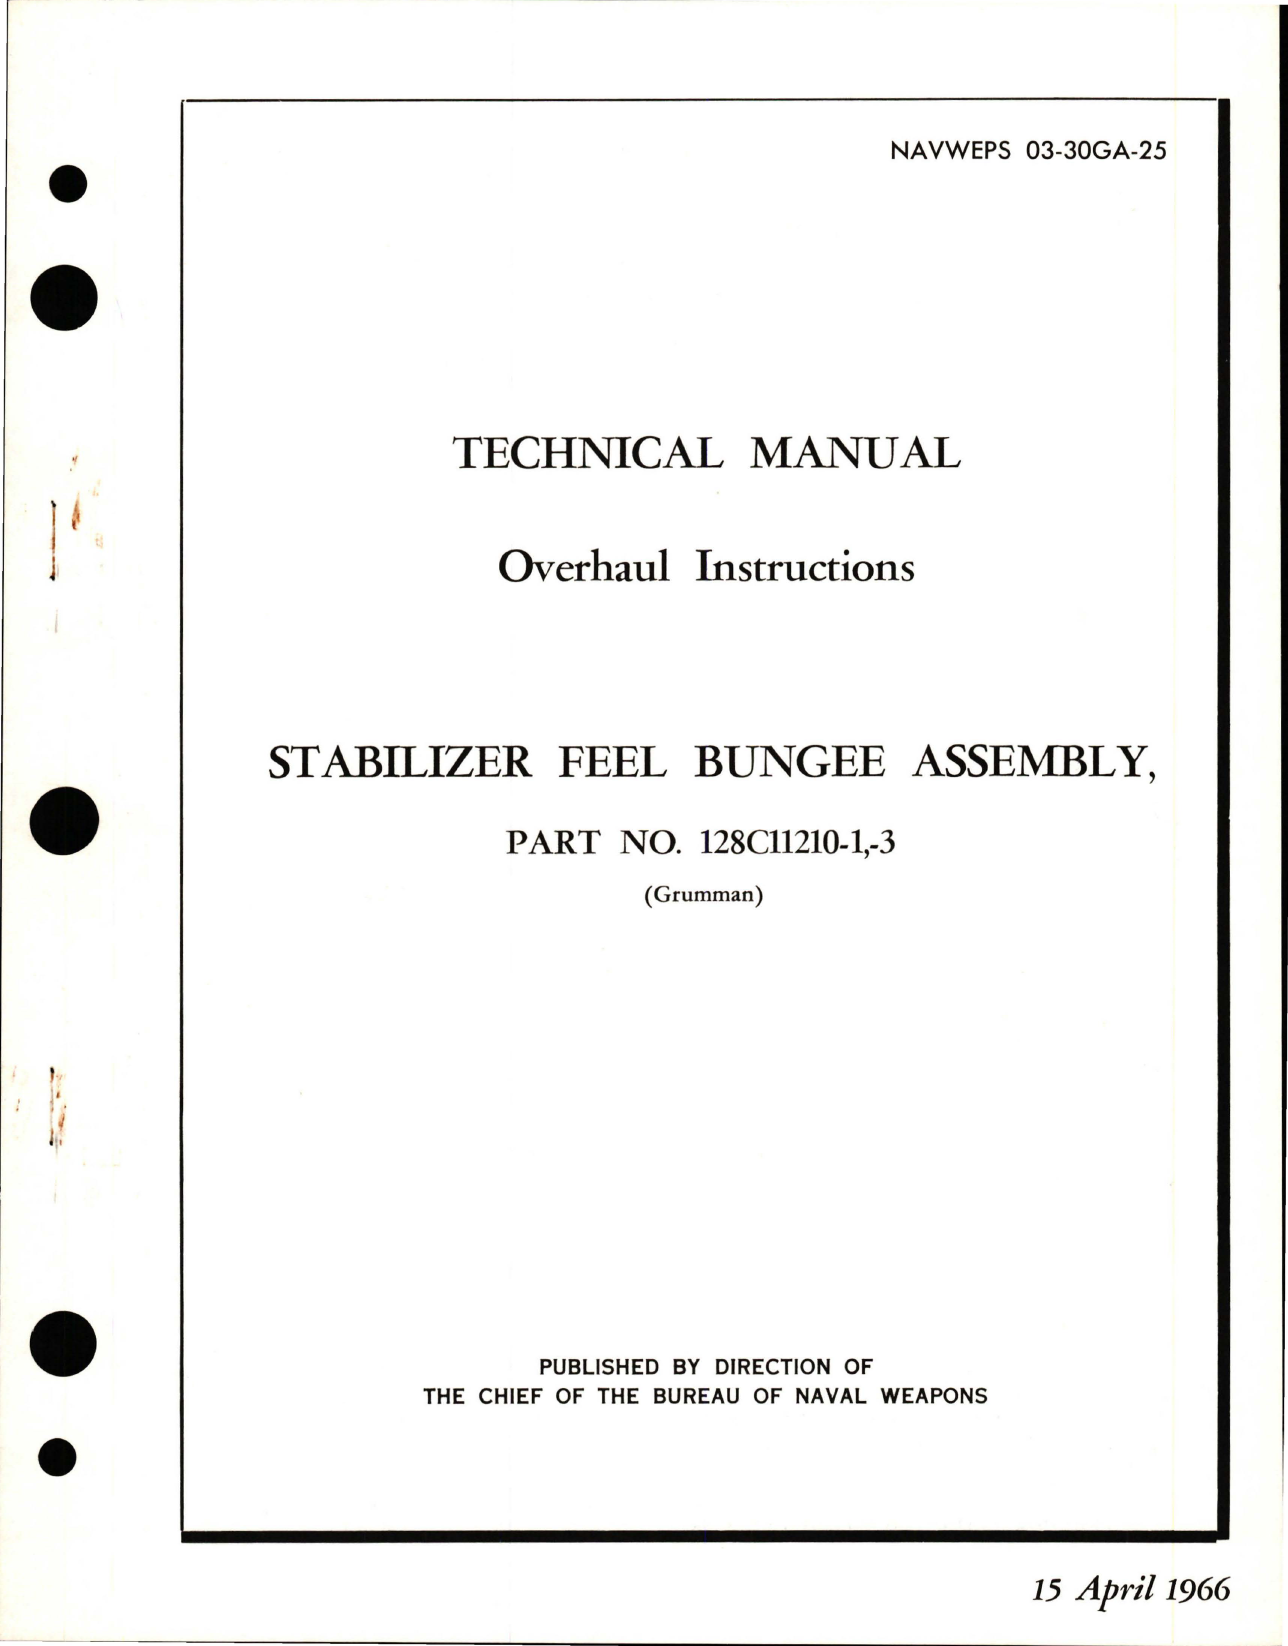 Sample page 1 from AirCorps Library document: Overhaul Instructions for Stabilizer Feel Bungee Assembly - Part 128C11210-1 and 128C11210-3 